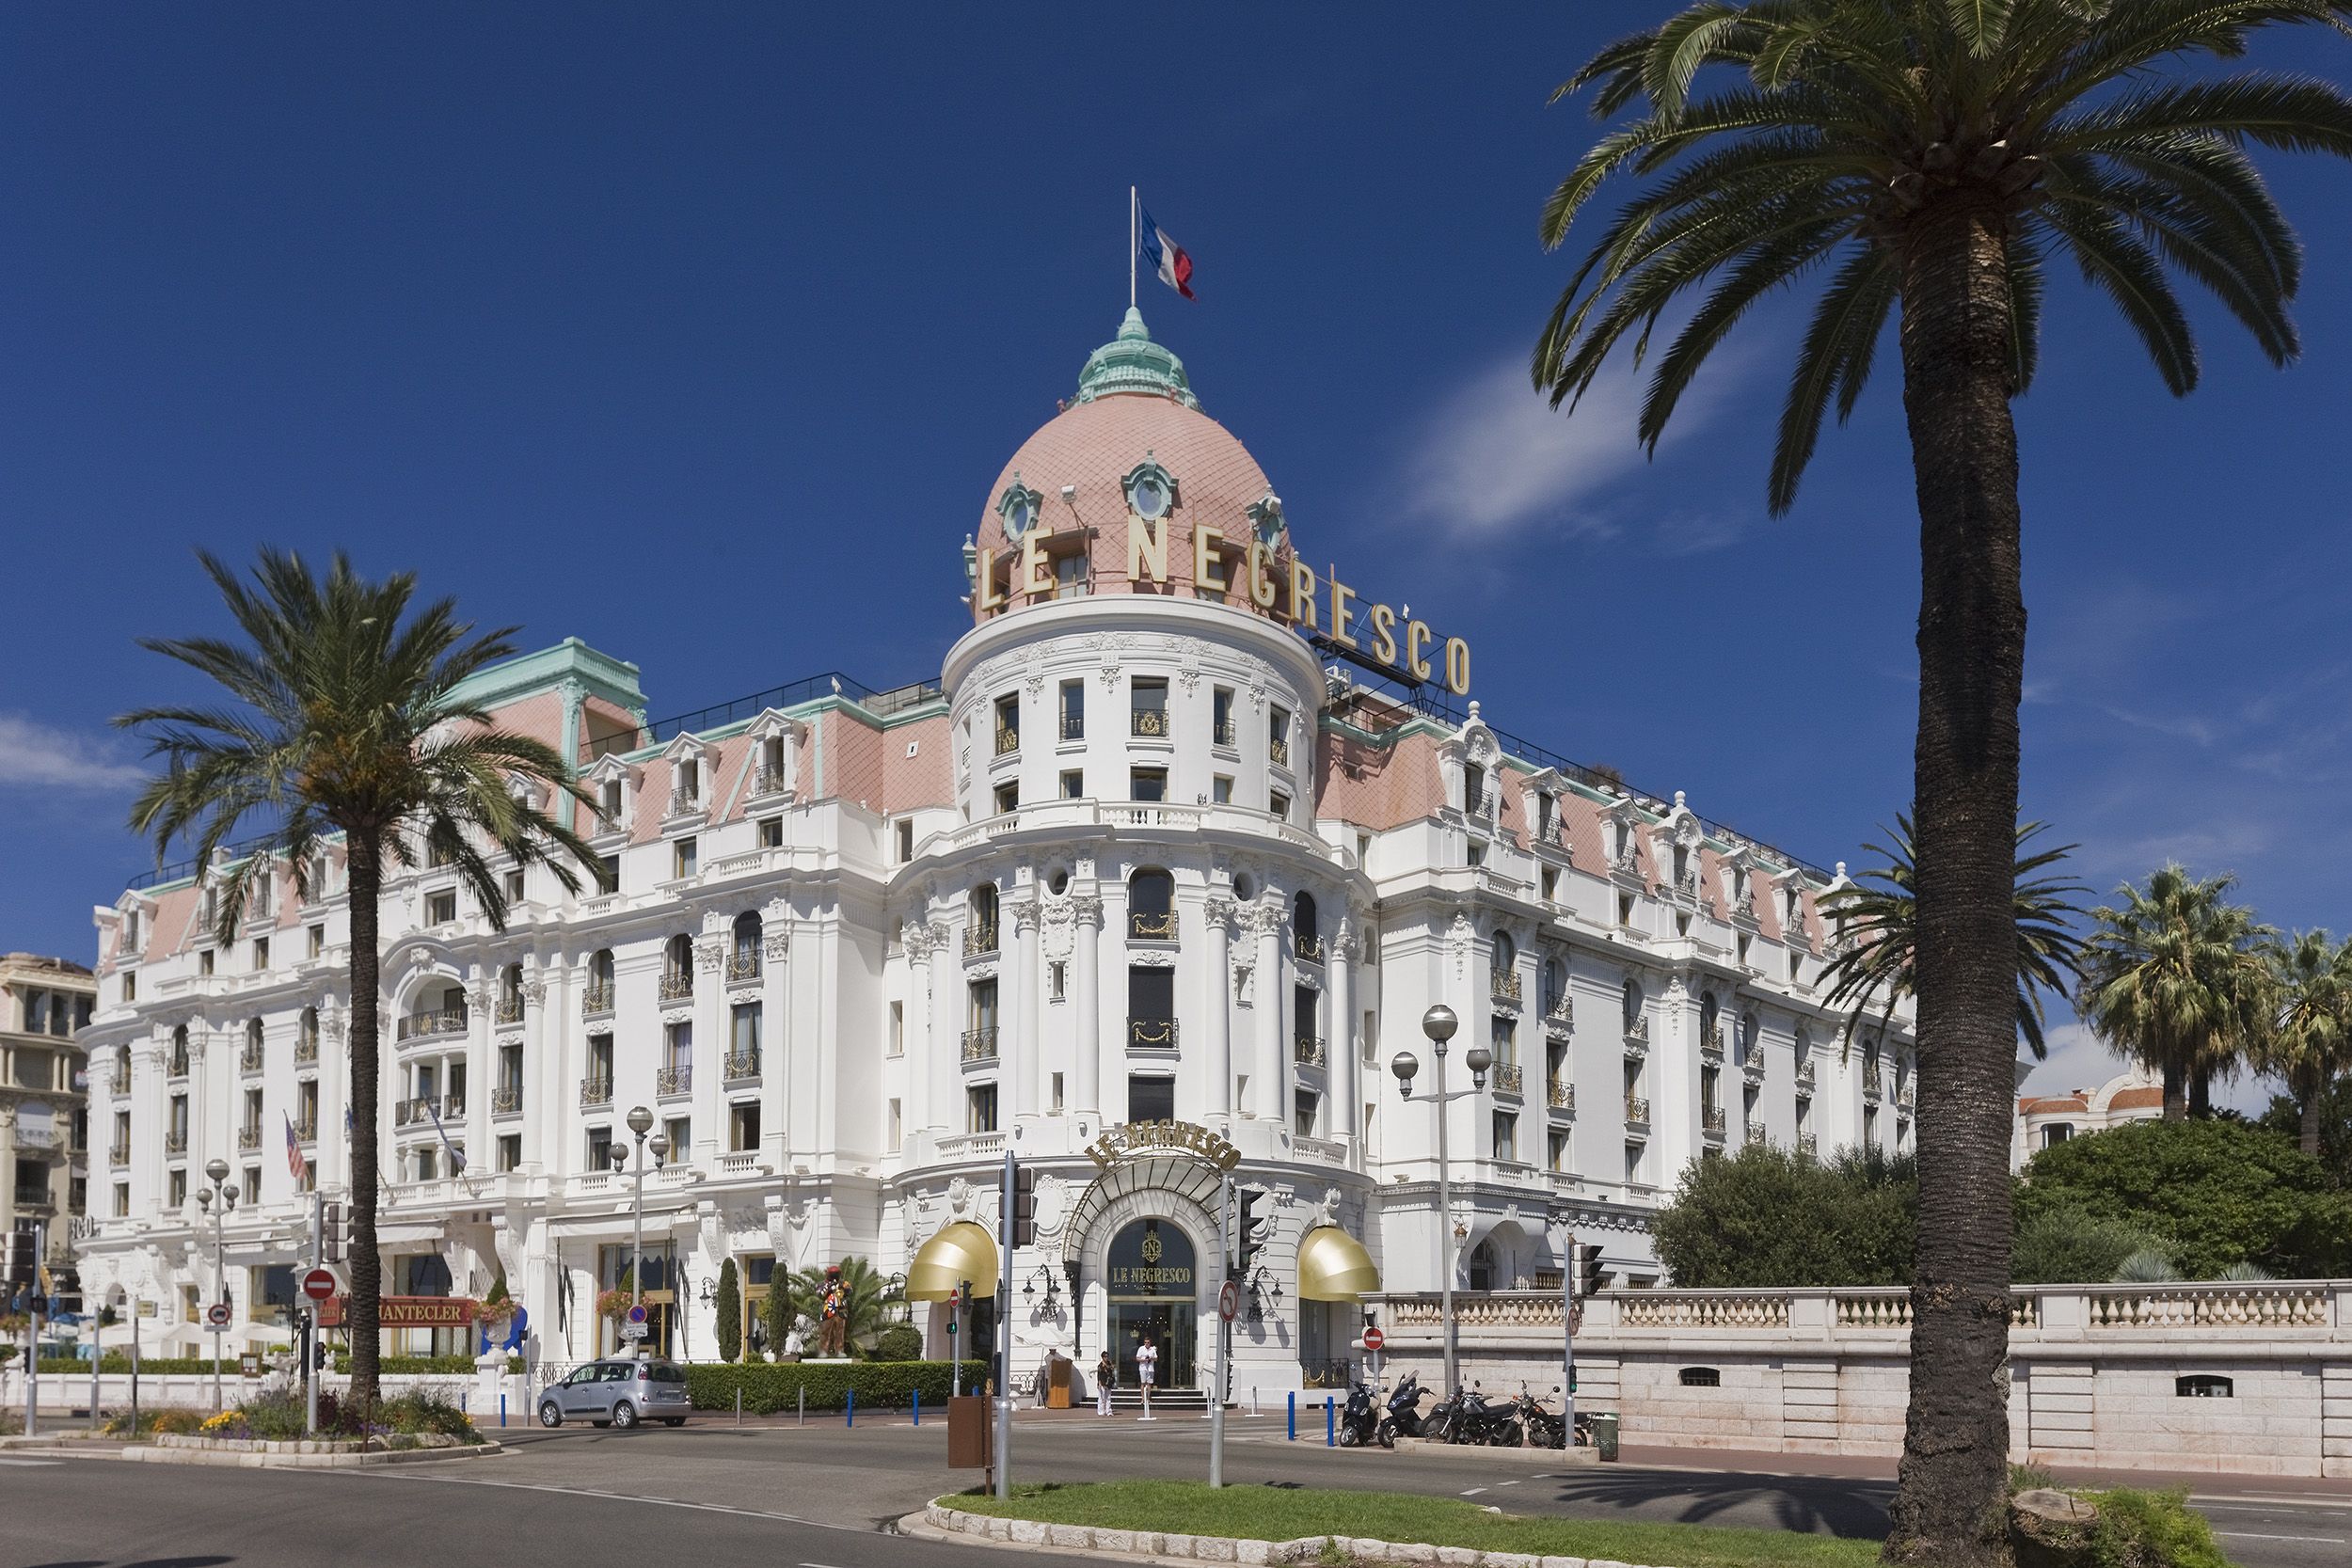 14 stylish hotels in Nice for a French Riviera getaway